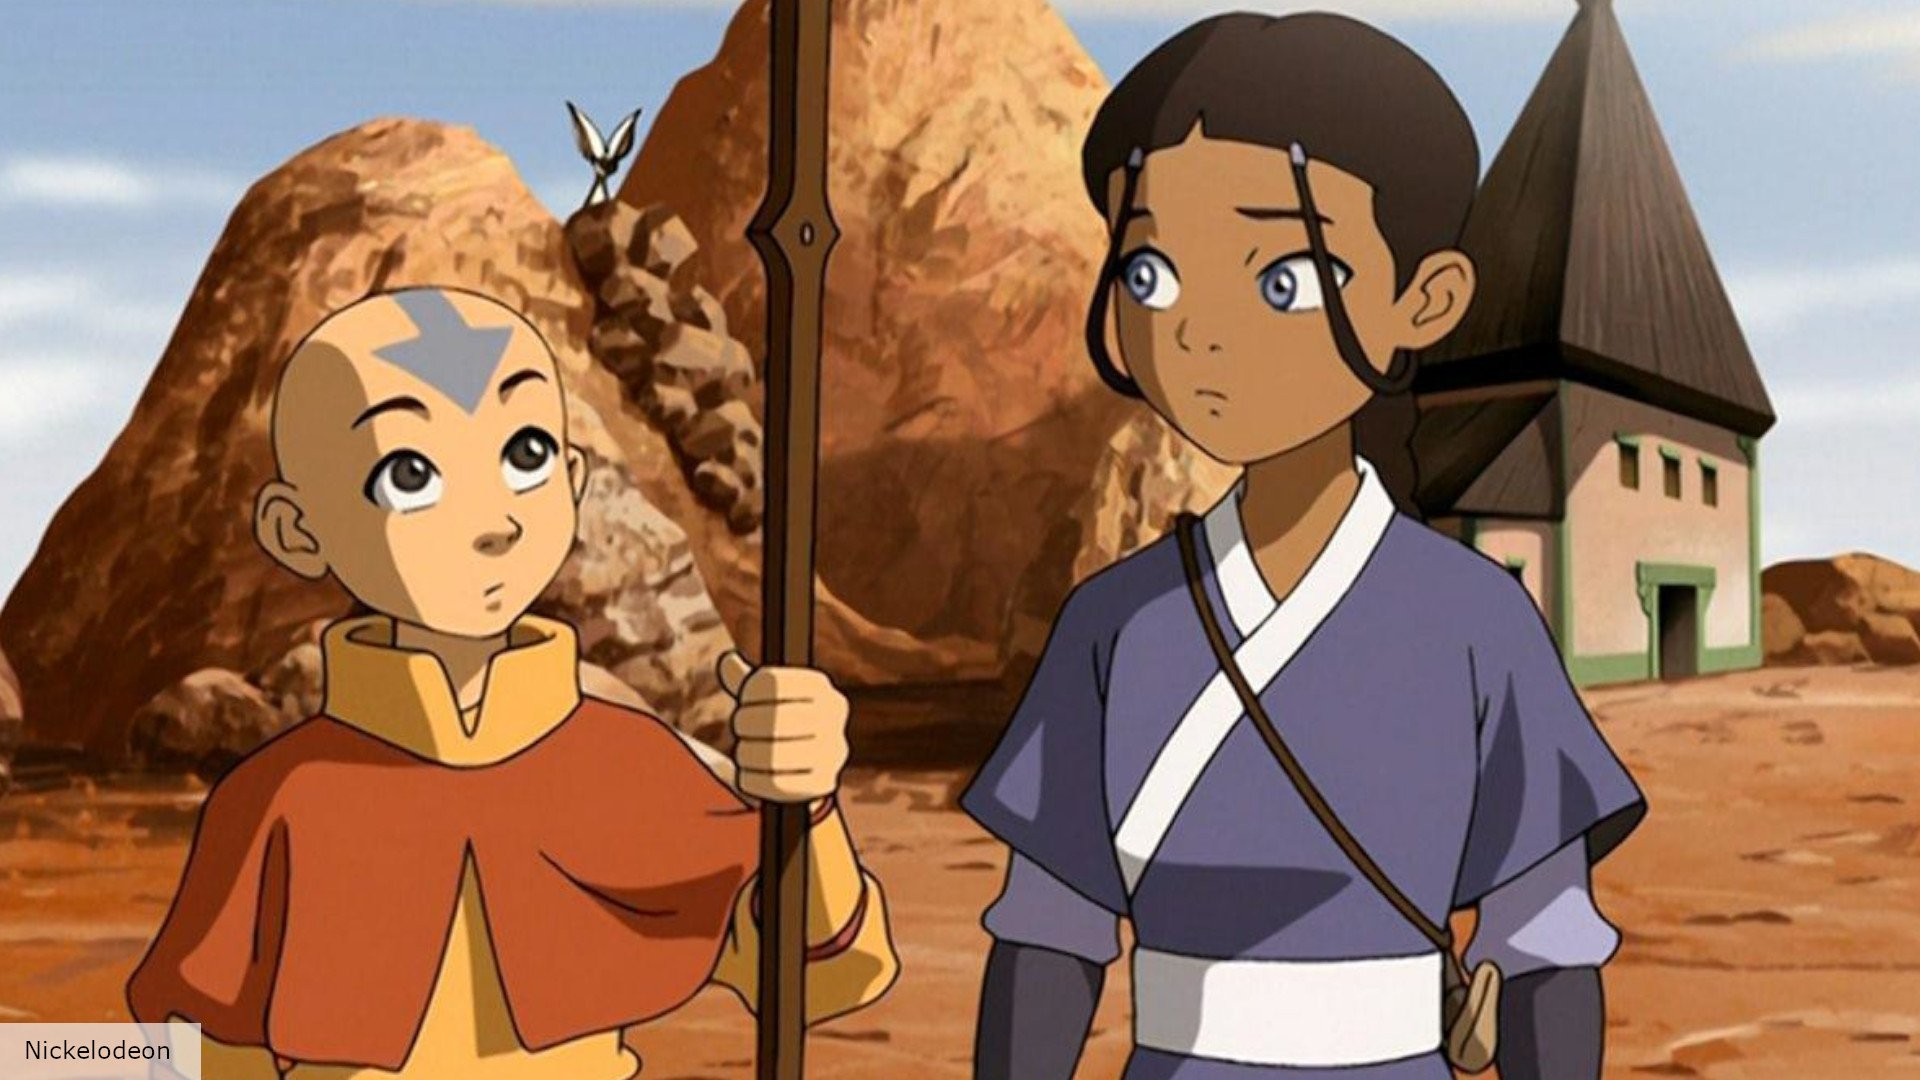 Avatar The Last Airbender Is Coming Back in a Big Way  IGN The Fix  Entertainment  IGN